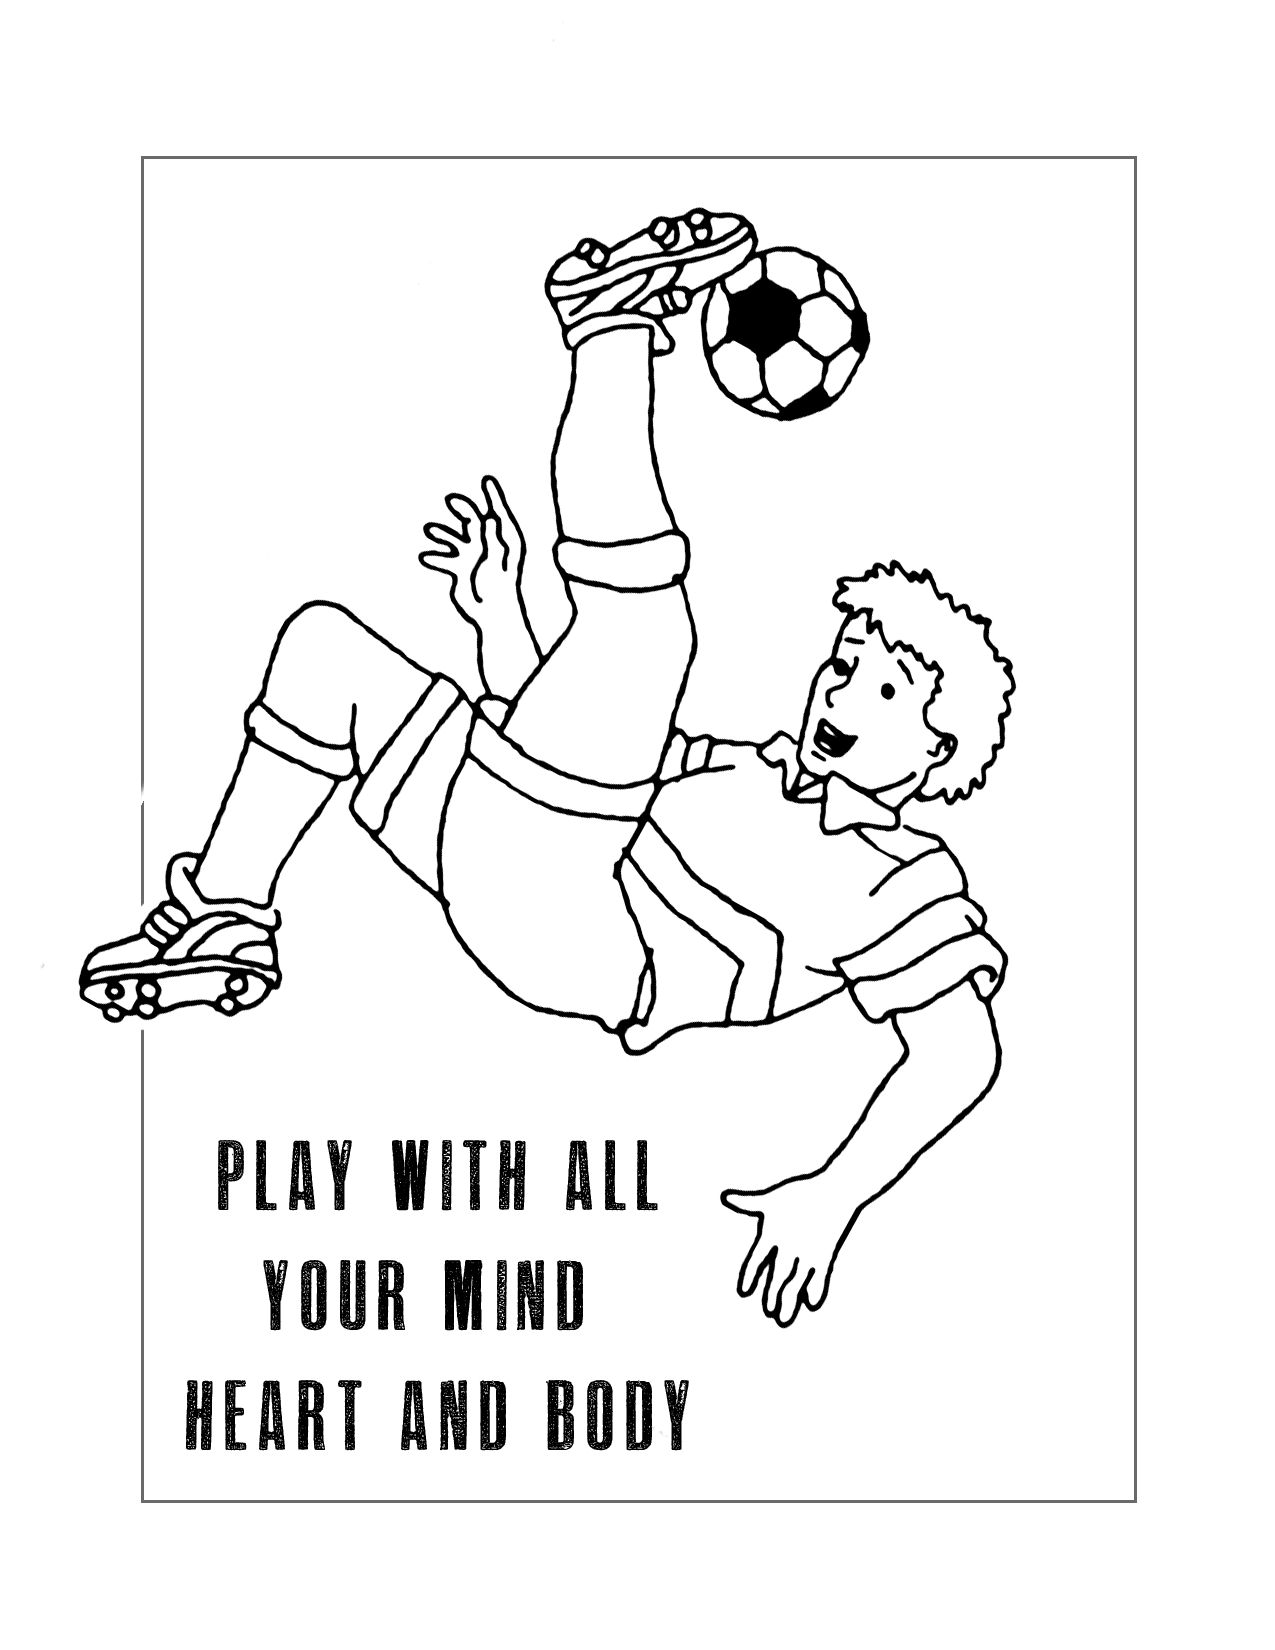 Play With Heart Soccer Coloring Page